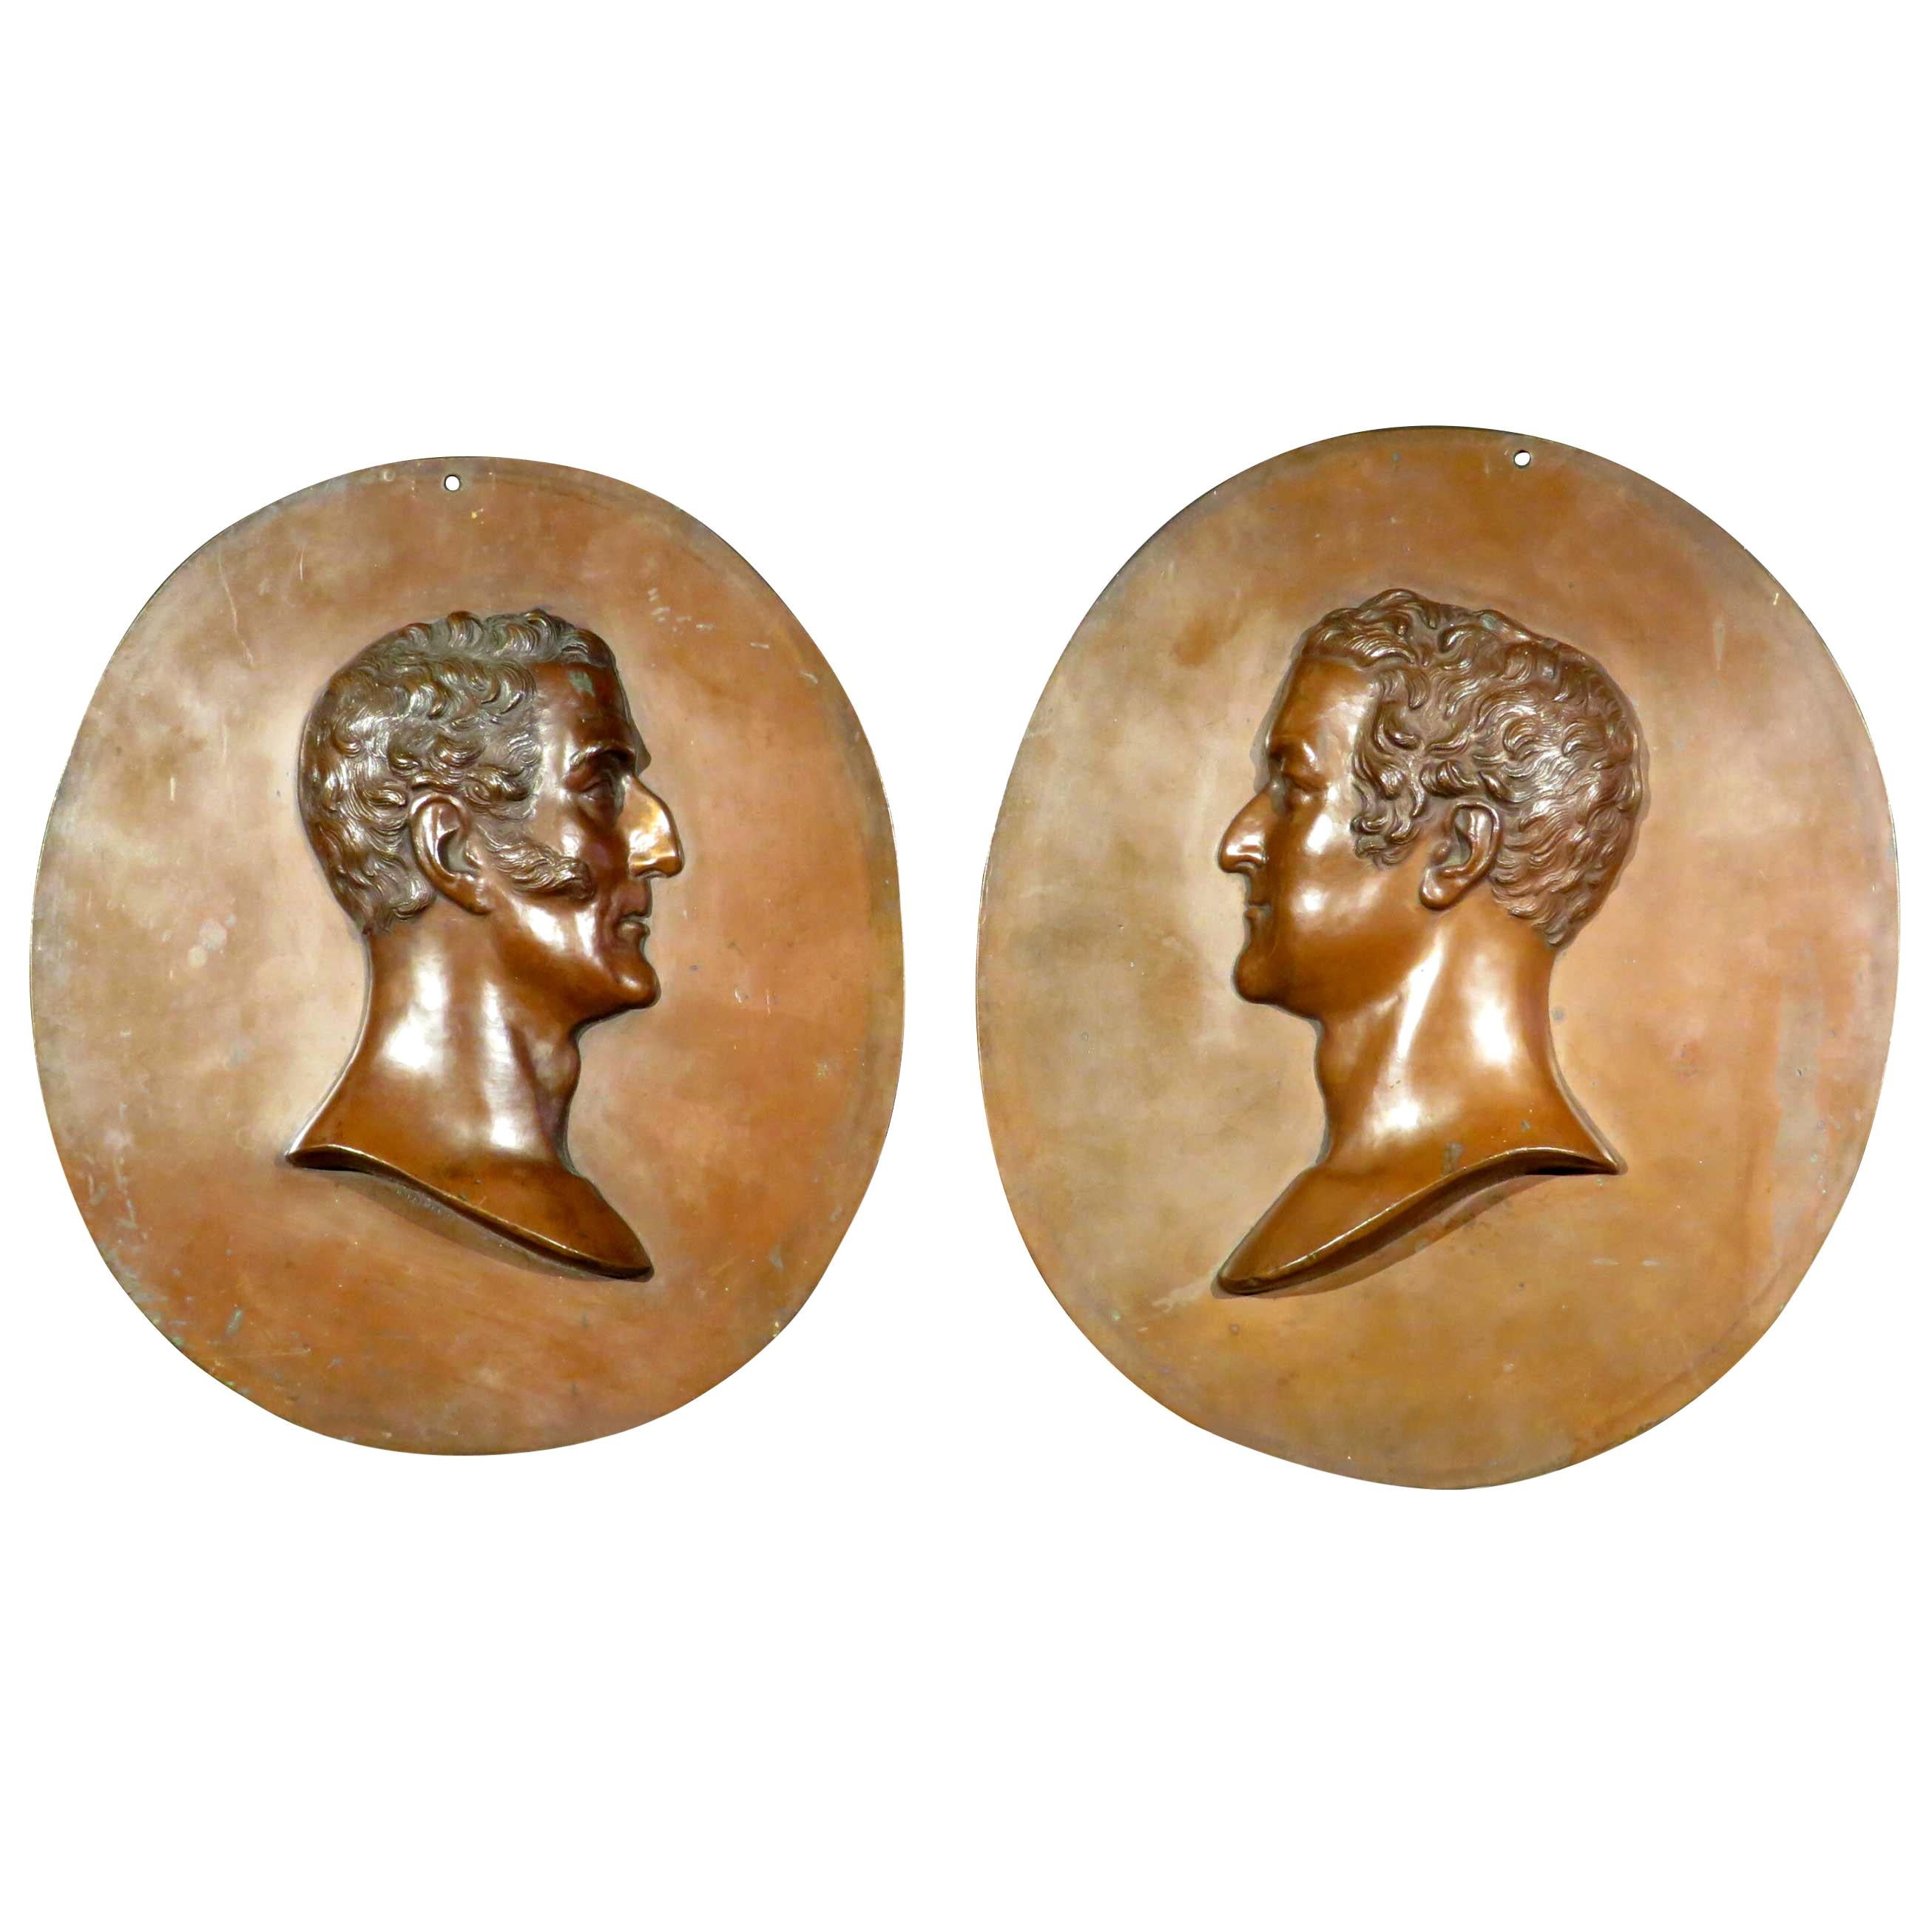 Large Pair of Signed 19th Century Relief Portrait Busts of Wellington & Napoleon